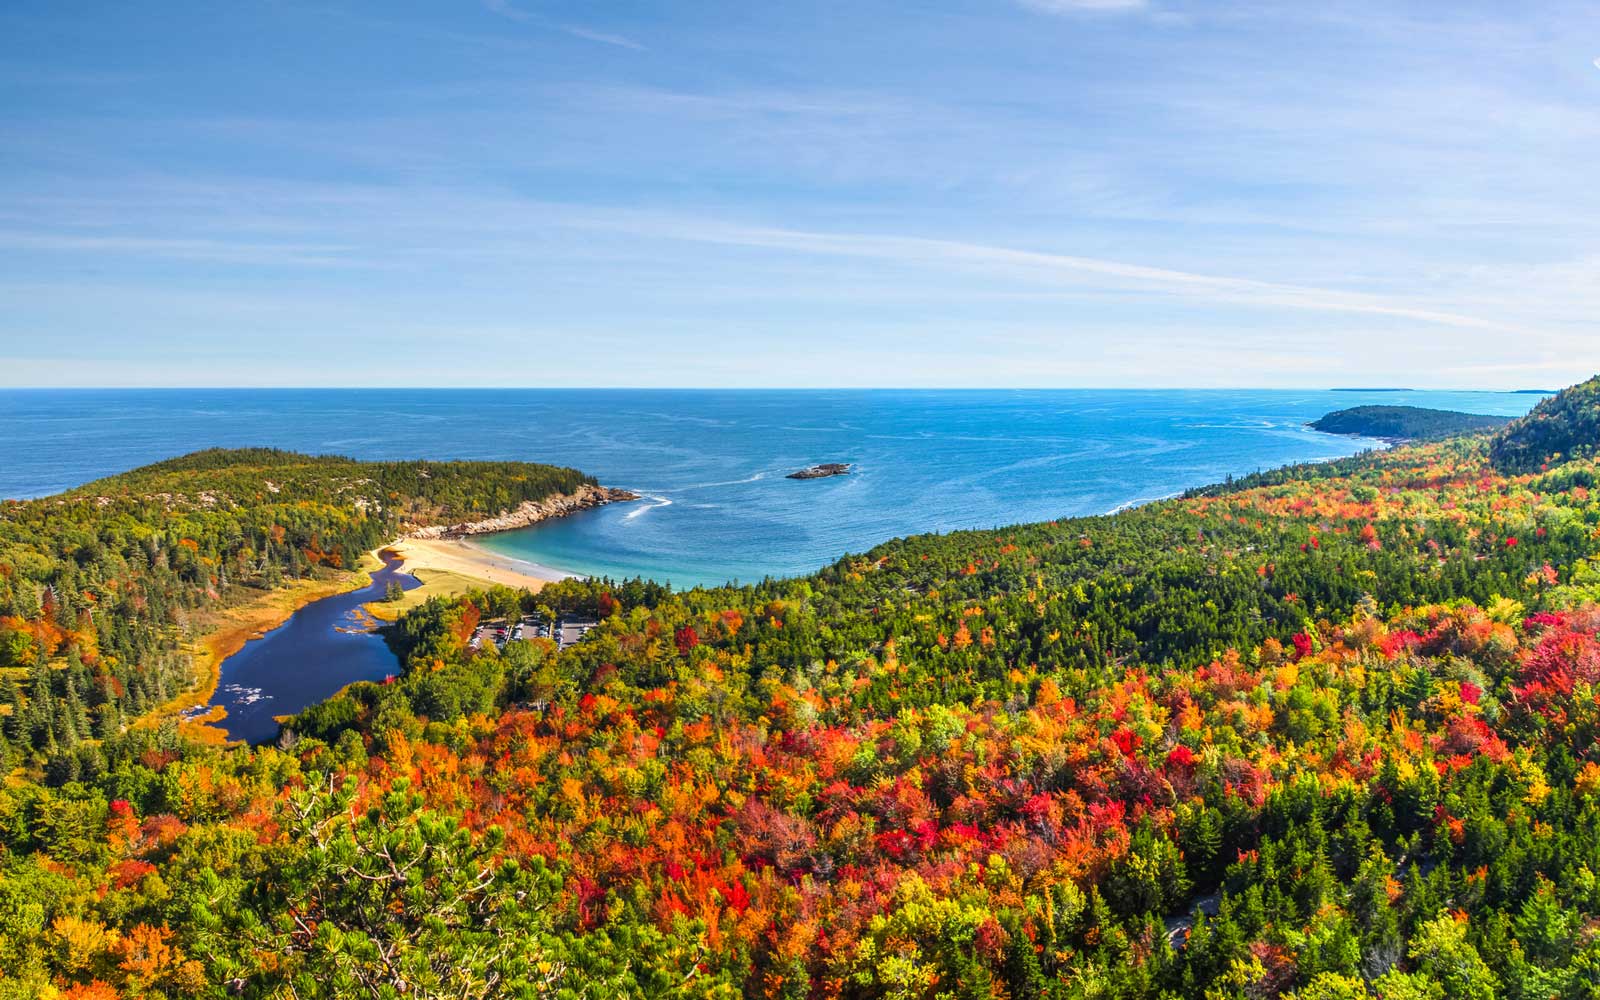 Acadia is especially beautiful in the fall.